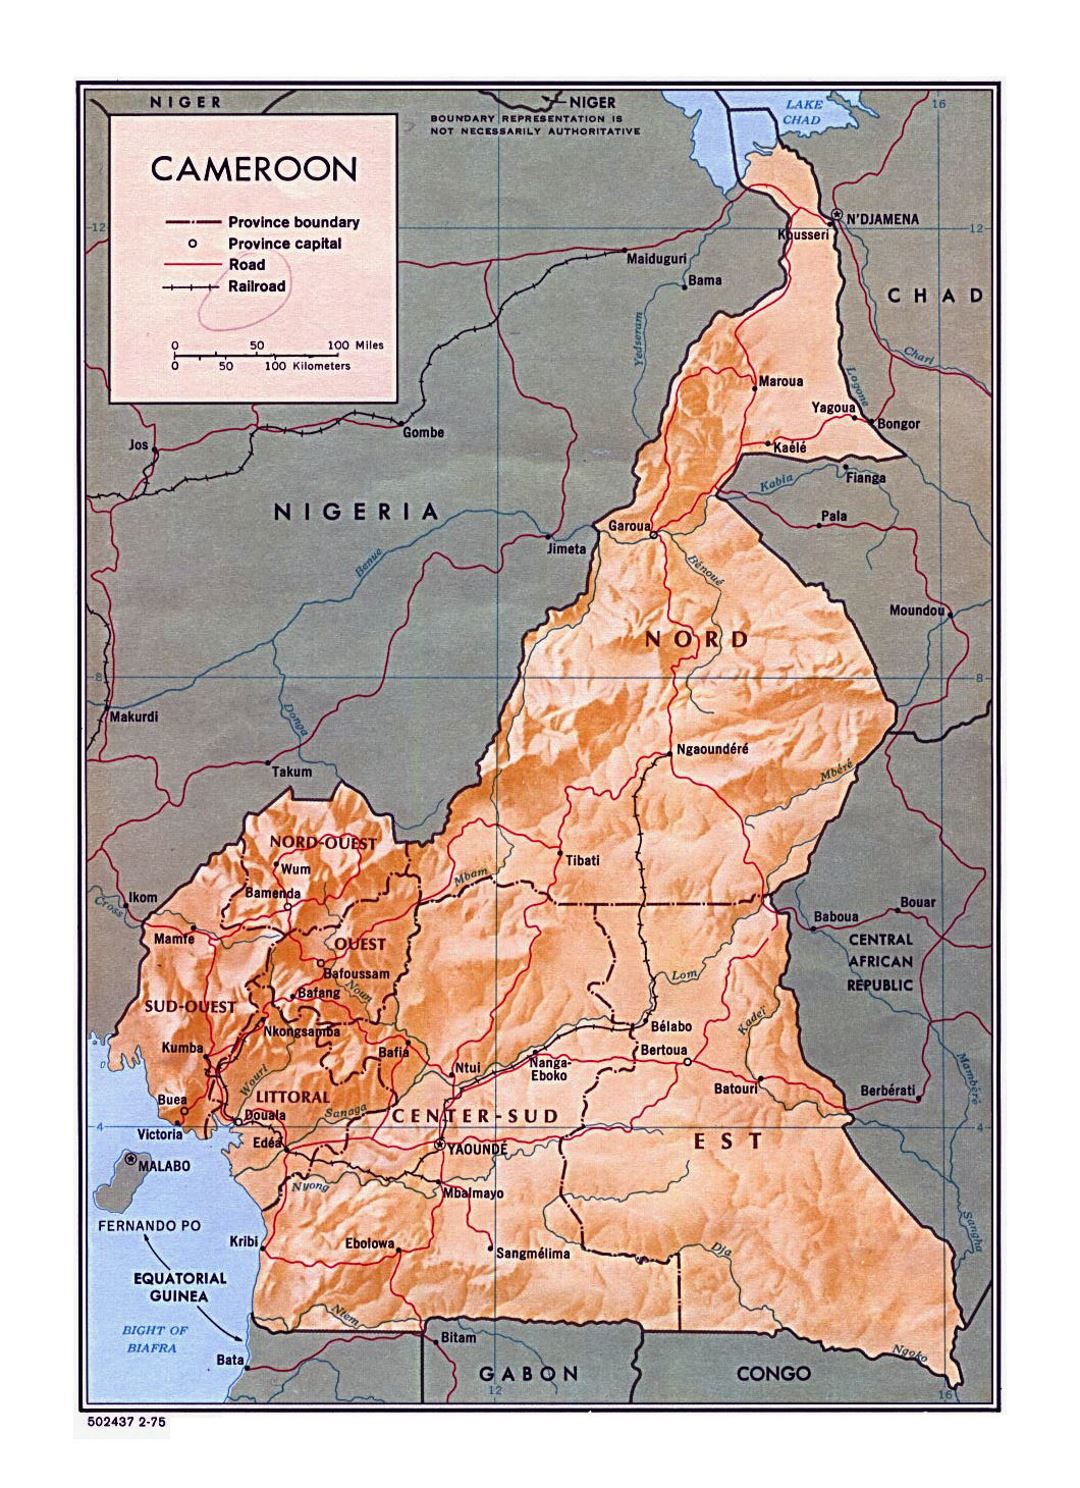 Detailed political and administrative map of Cameroon with relief, roads, railroads and major cities - 1975